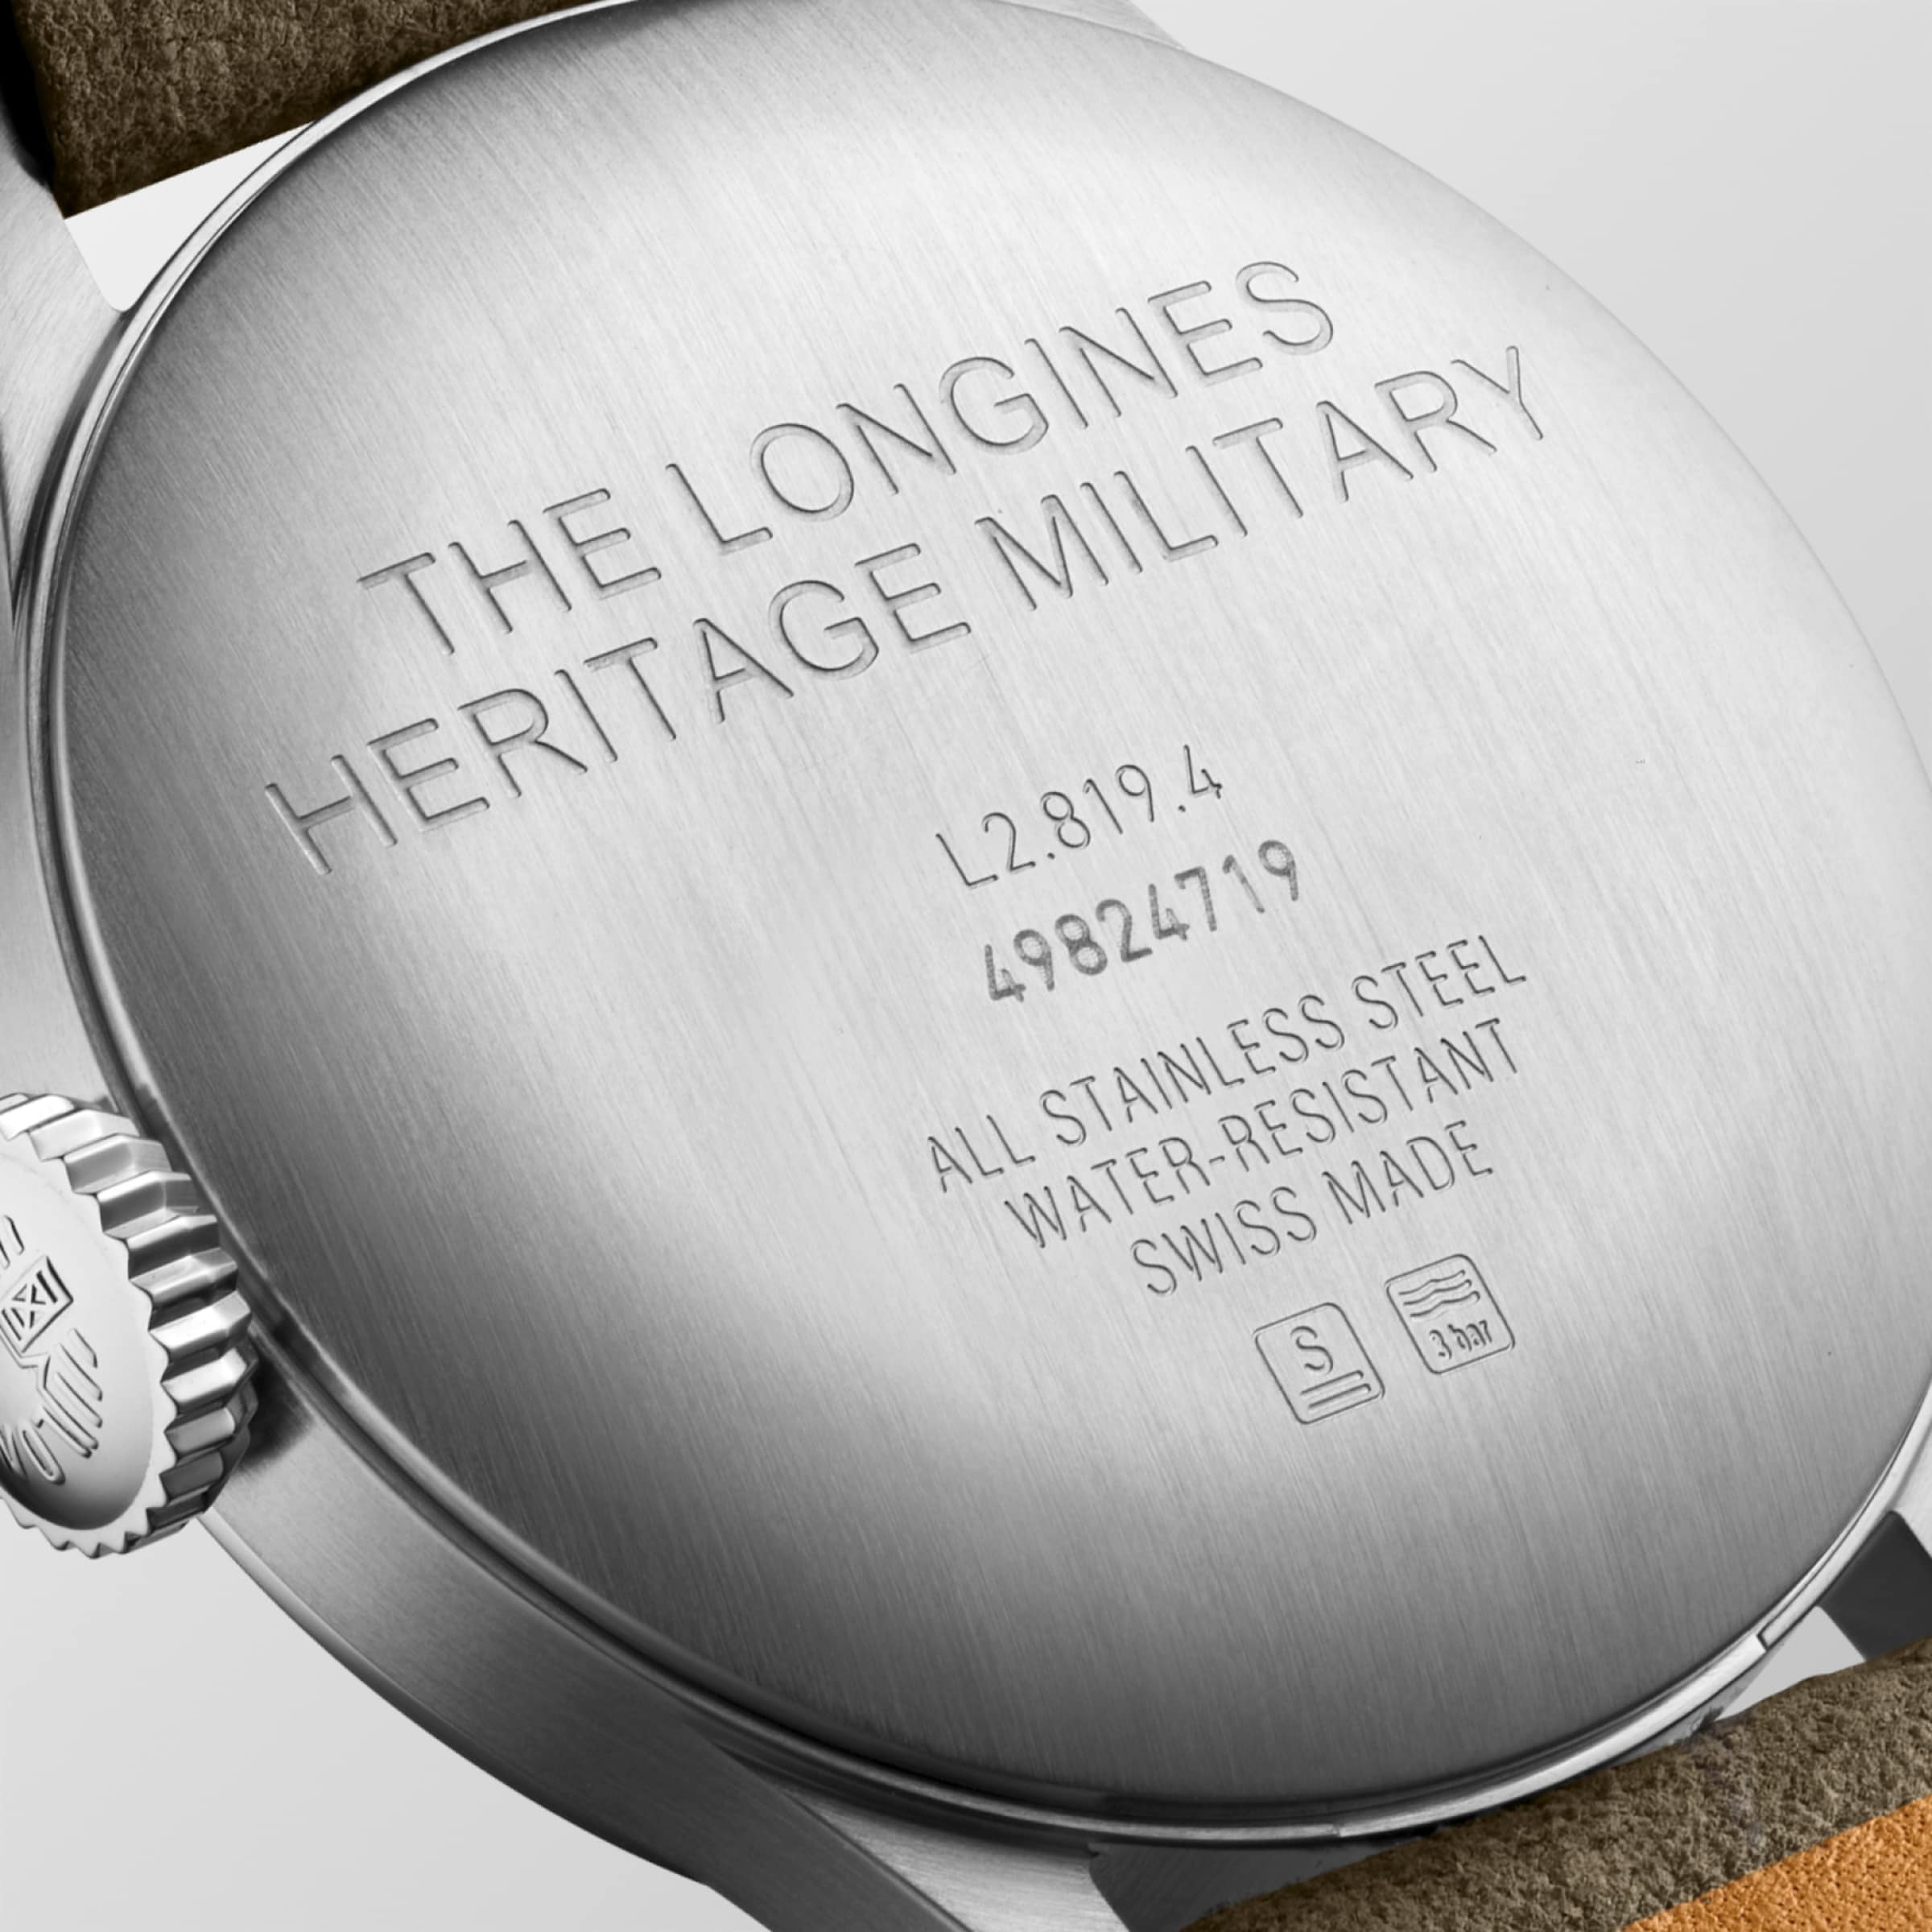 Longines HERITAGE MILITARY Automatic Stainless steel Watch - L2.819.4.93.2